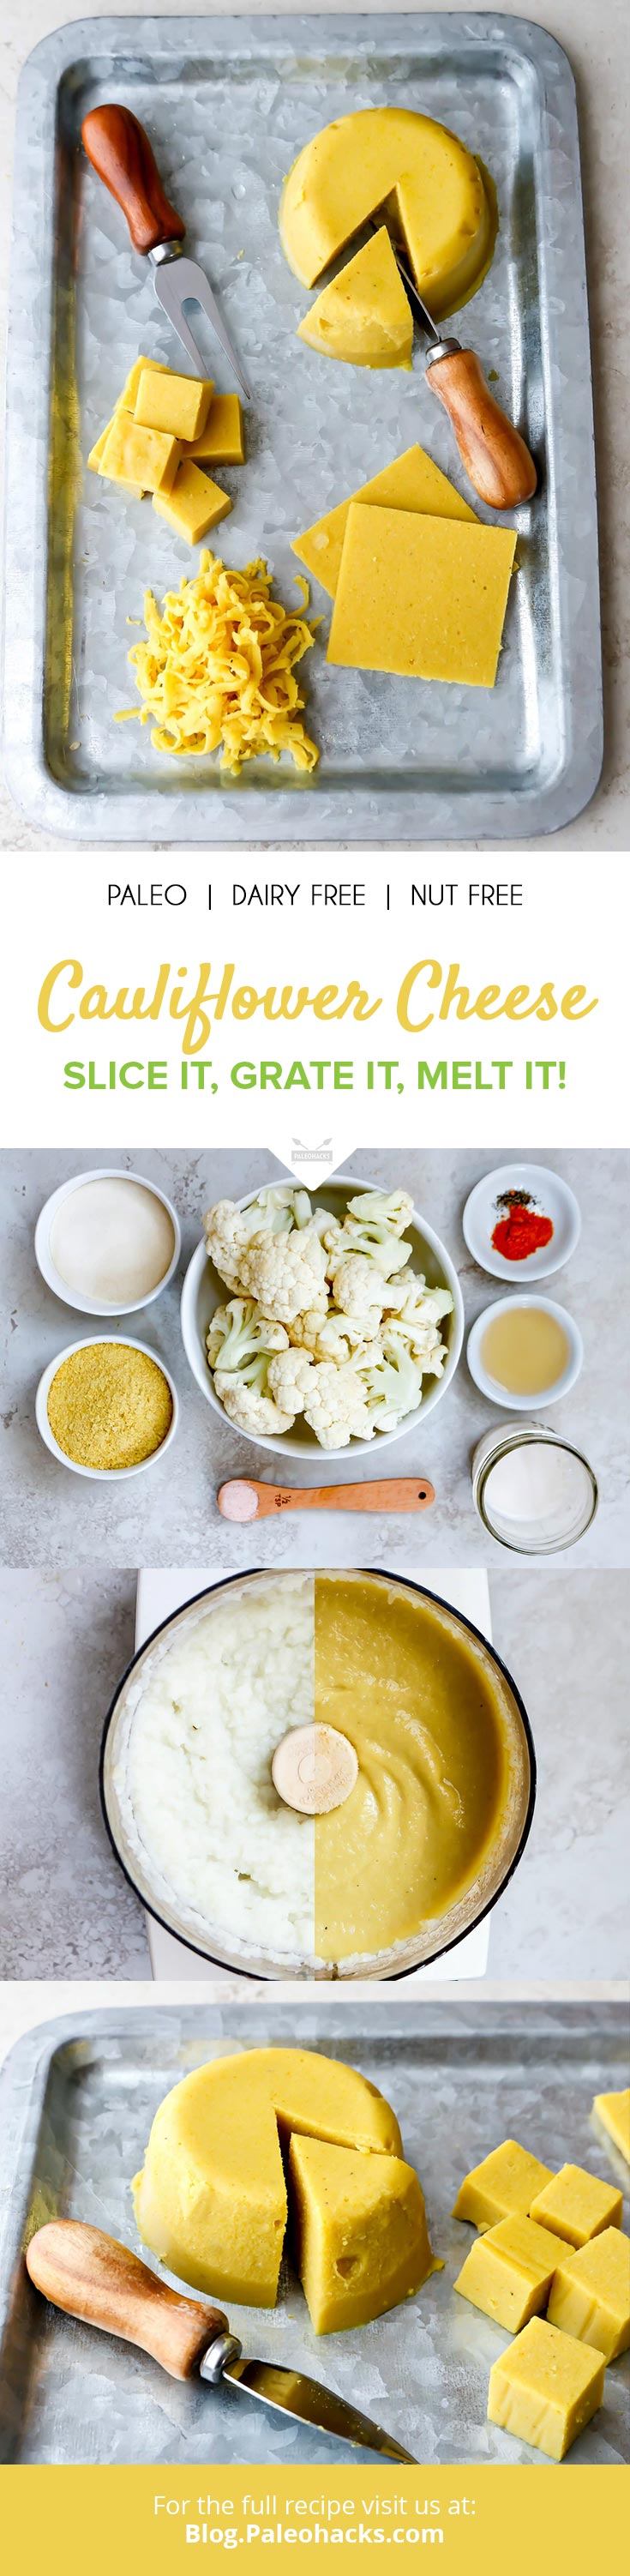 If you’ve been searching for a Paleo-friendly cheese that can be grated over veggie noodles or sliced and melted into Paleo sandwiches, this is the recipe for you.